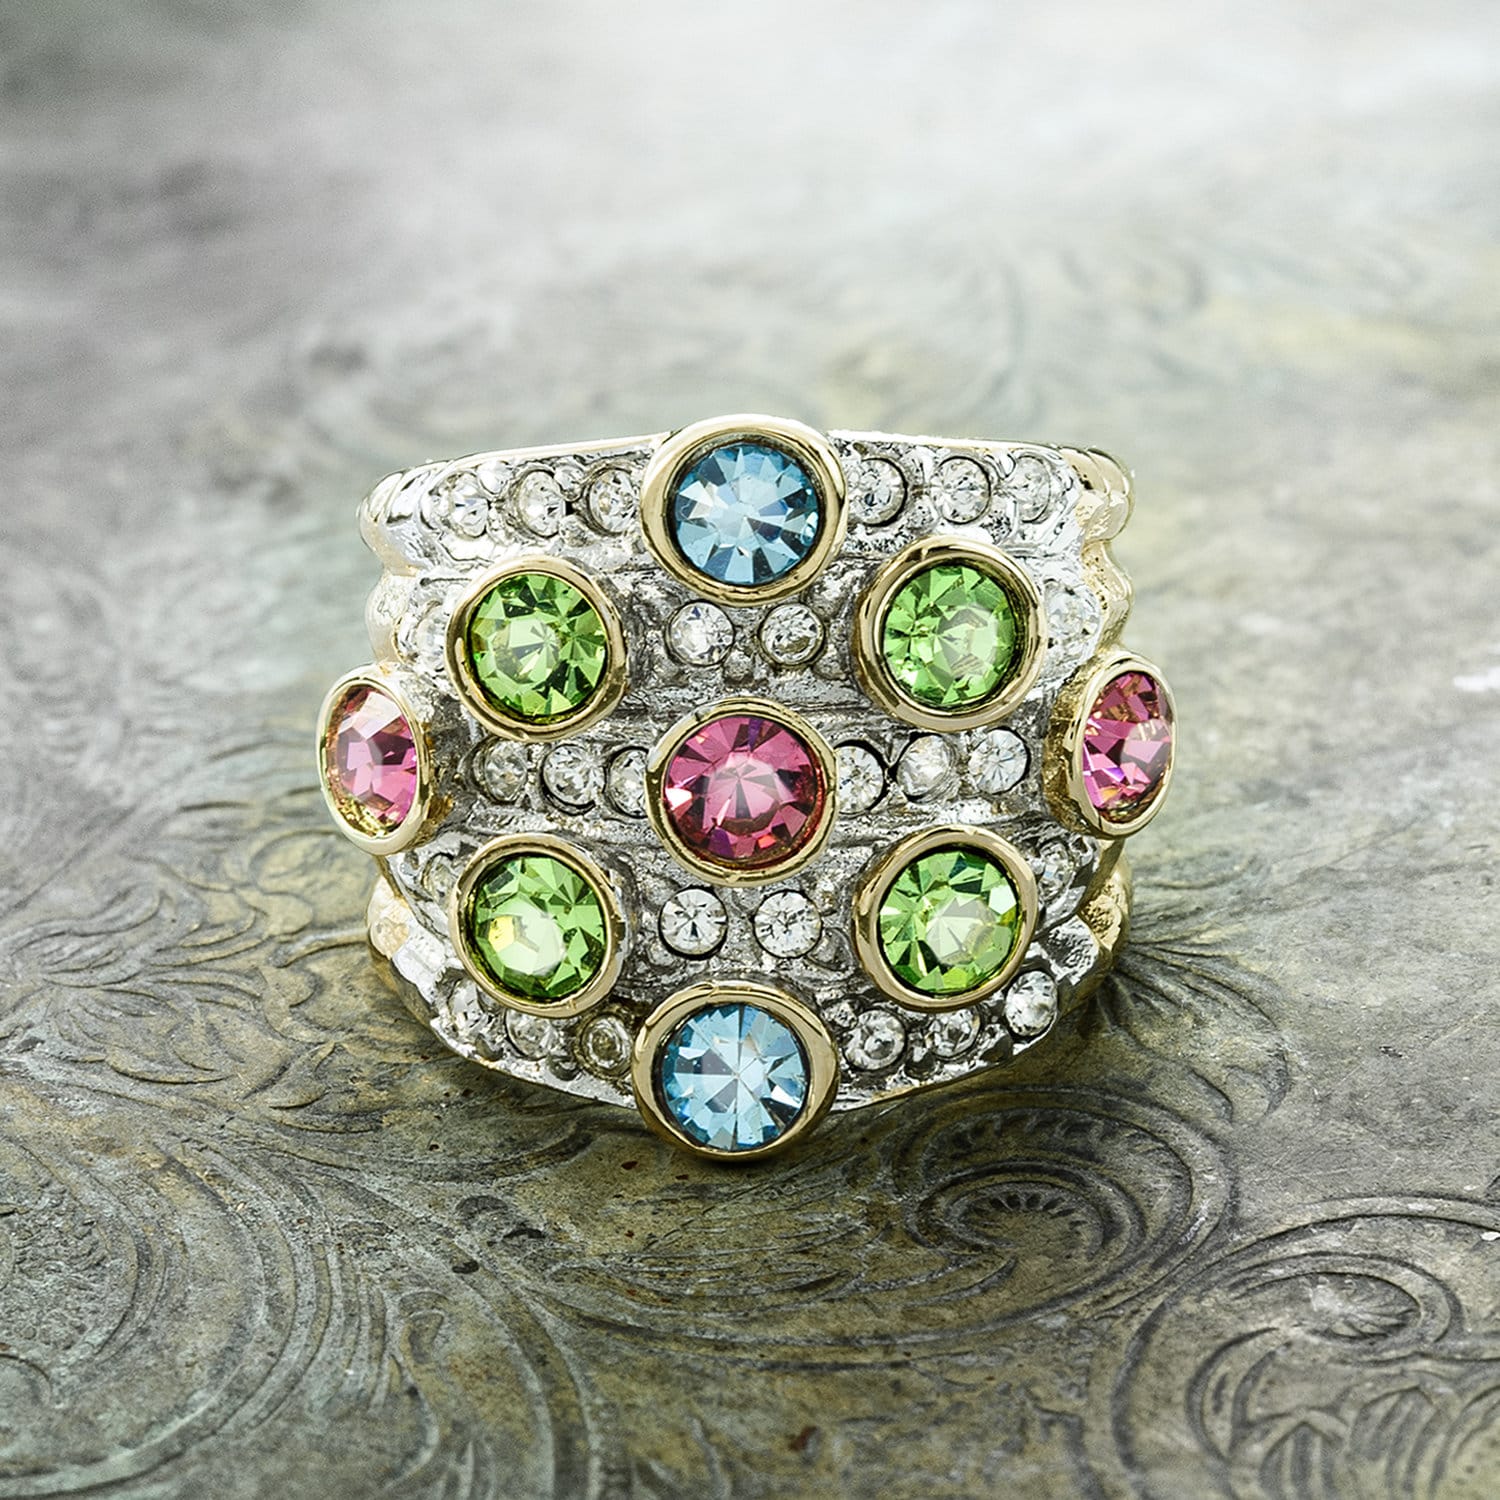 Vintage Ring Pave Pastel Multi Color Crystals Clear Swarovski Crystal Ring 18k Gold Antique Womans Jewelry - Limited Stock - Never Worn